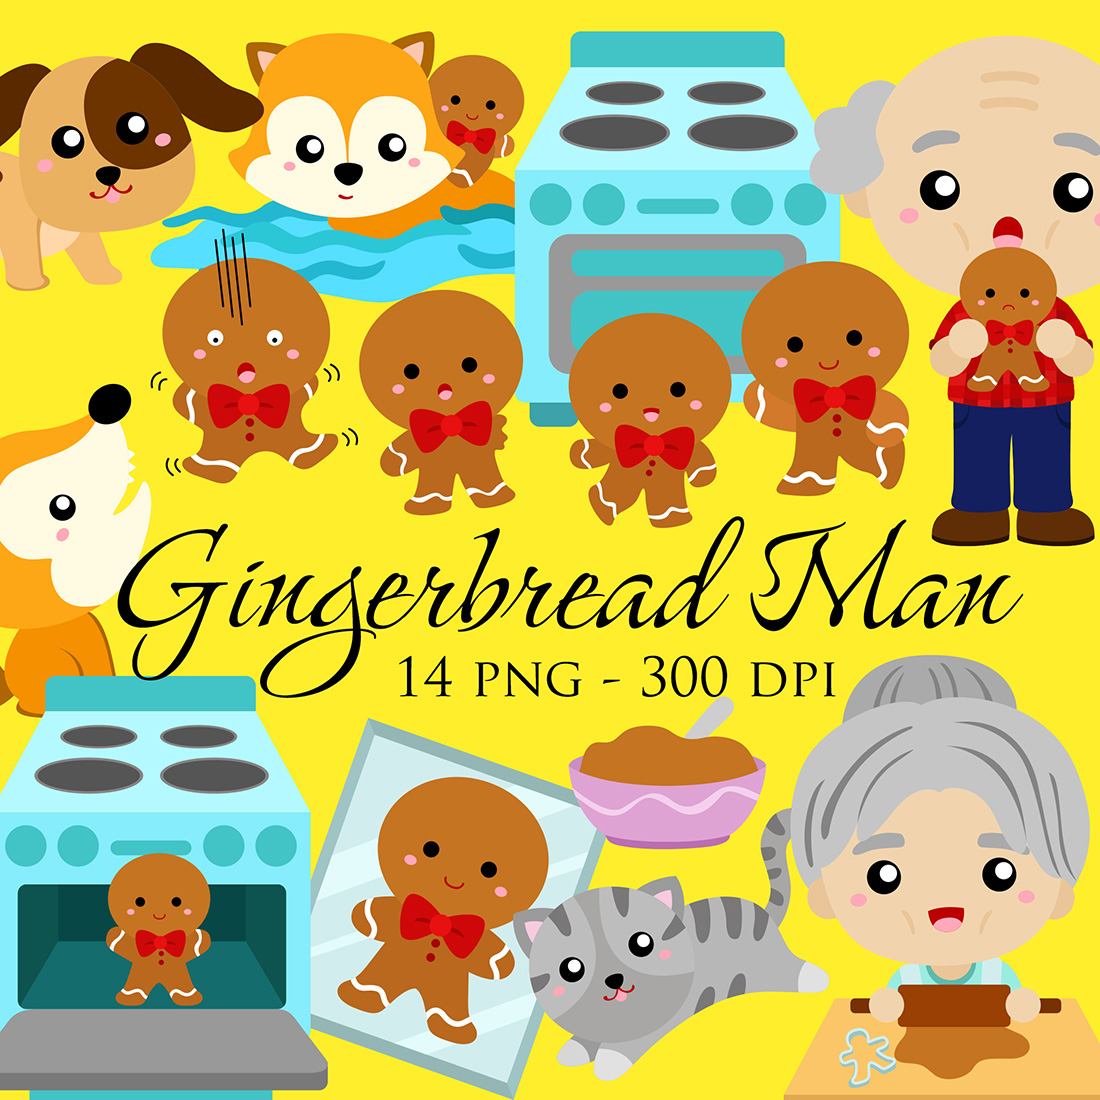 Cute Gingerbread Cookies with Man and Animals Illustration Vector Clipart Cartoon cover image.